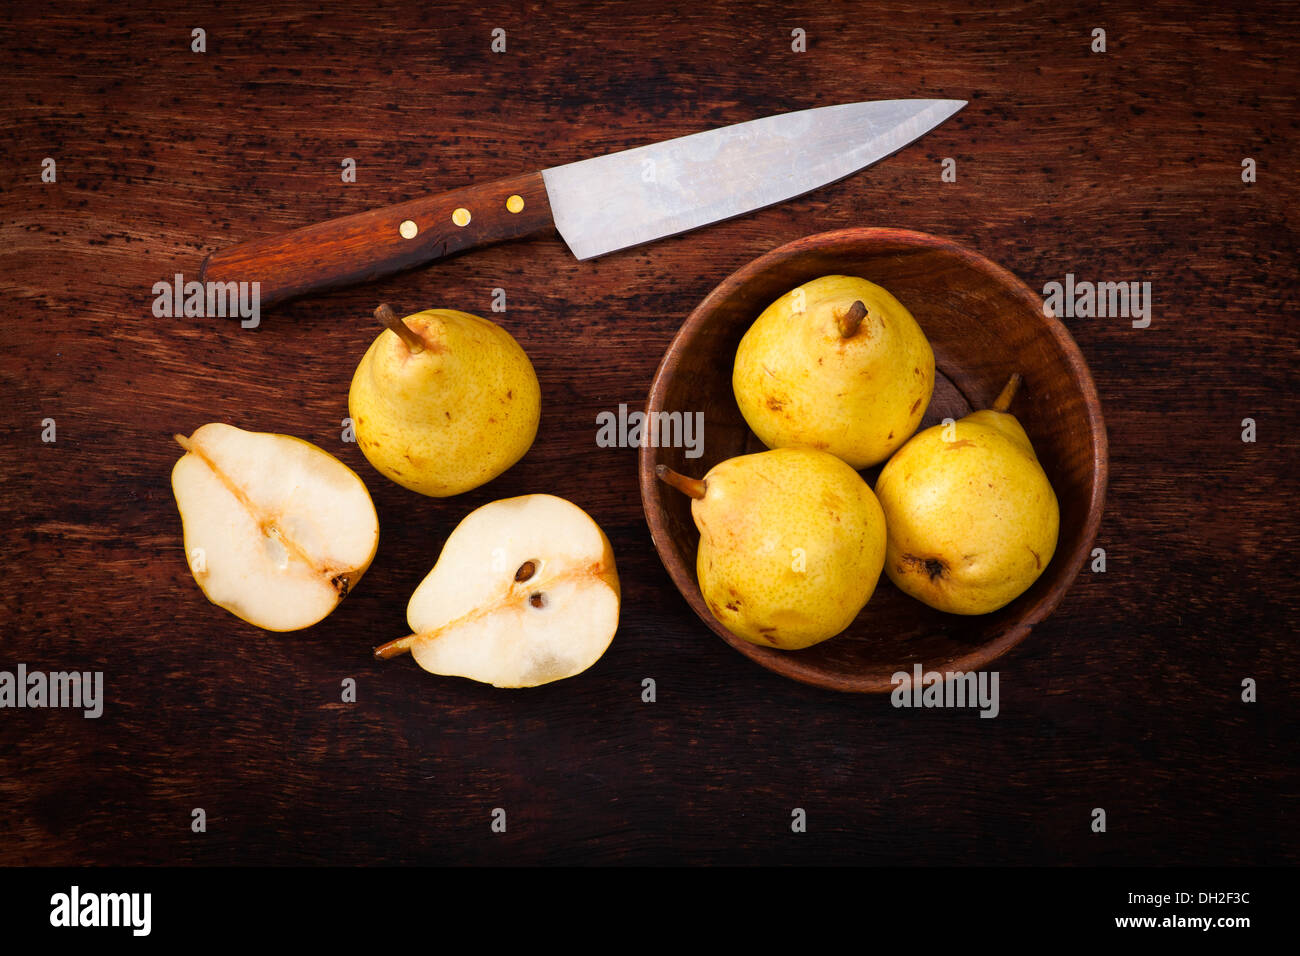 yellow pears in wooden bowl on wooden table Stock Photo